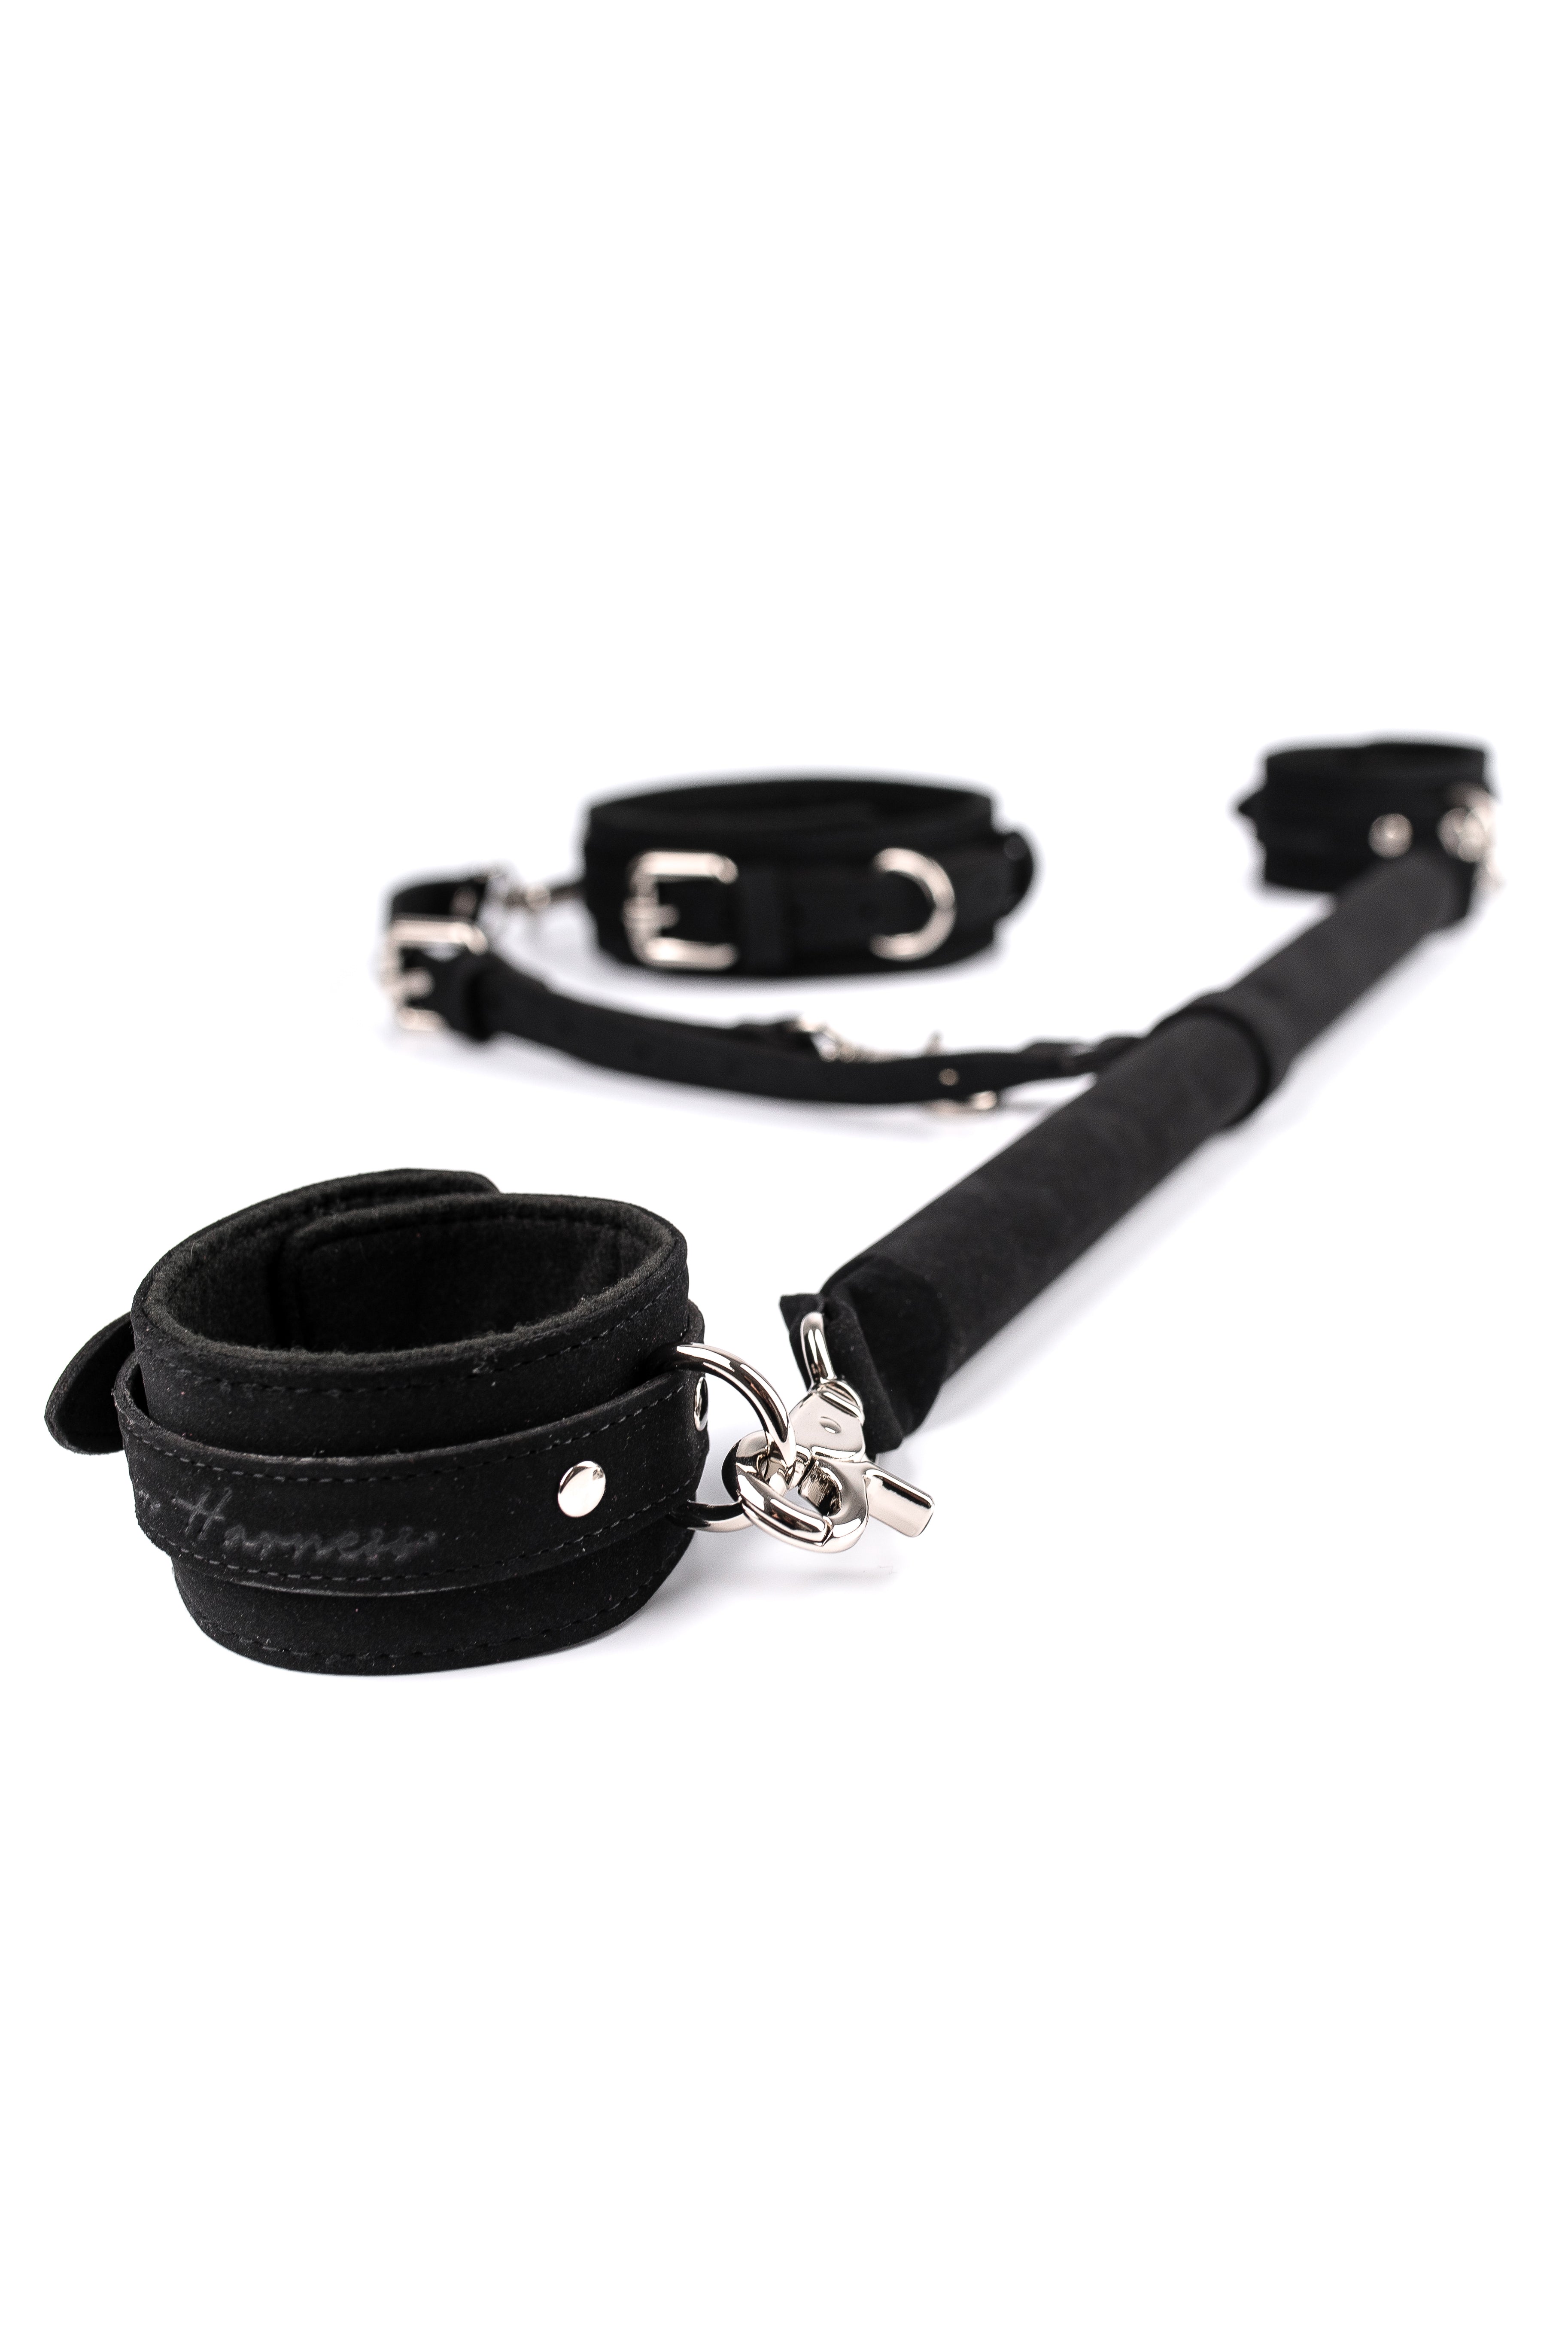 Full Kit of 3 Point Faux Leather Spreader Bar with Cuffs and Collar